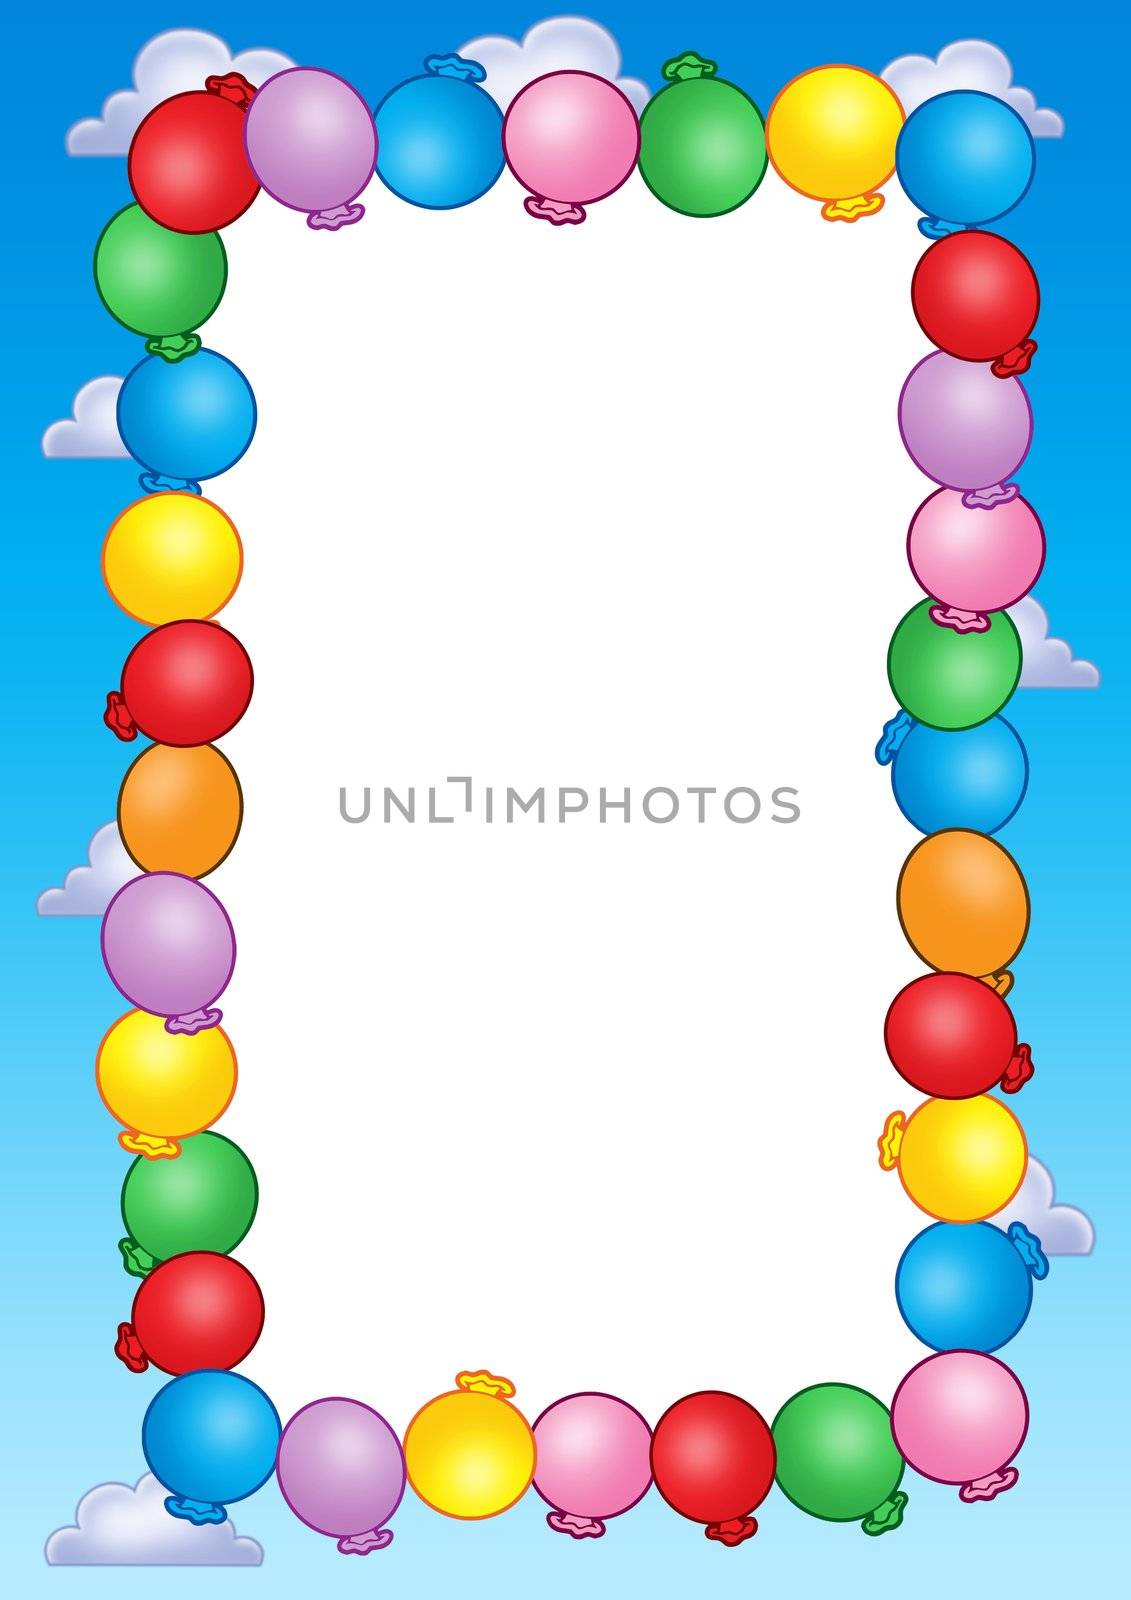 Party invitation frame with balloons - color illustration.